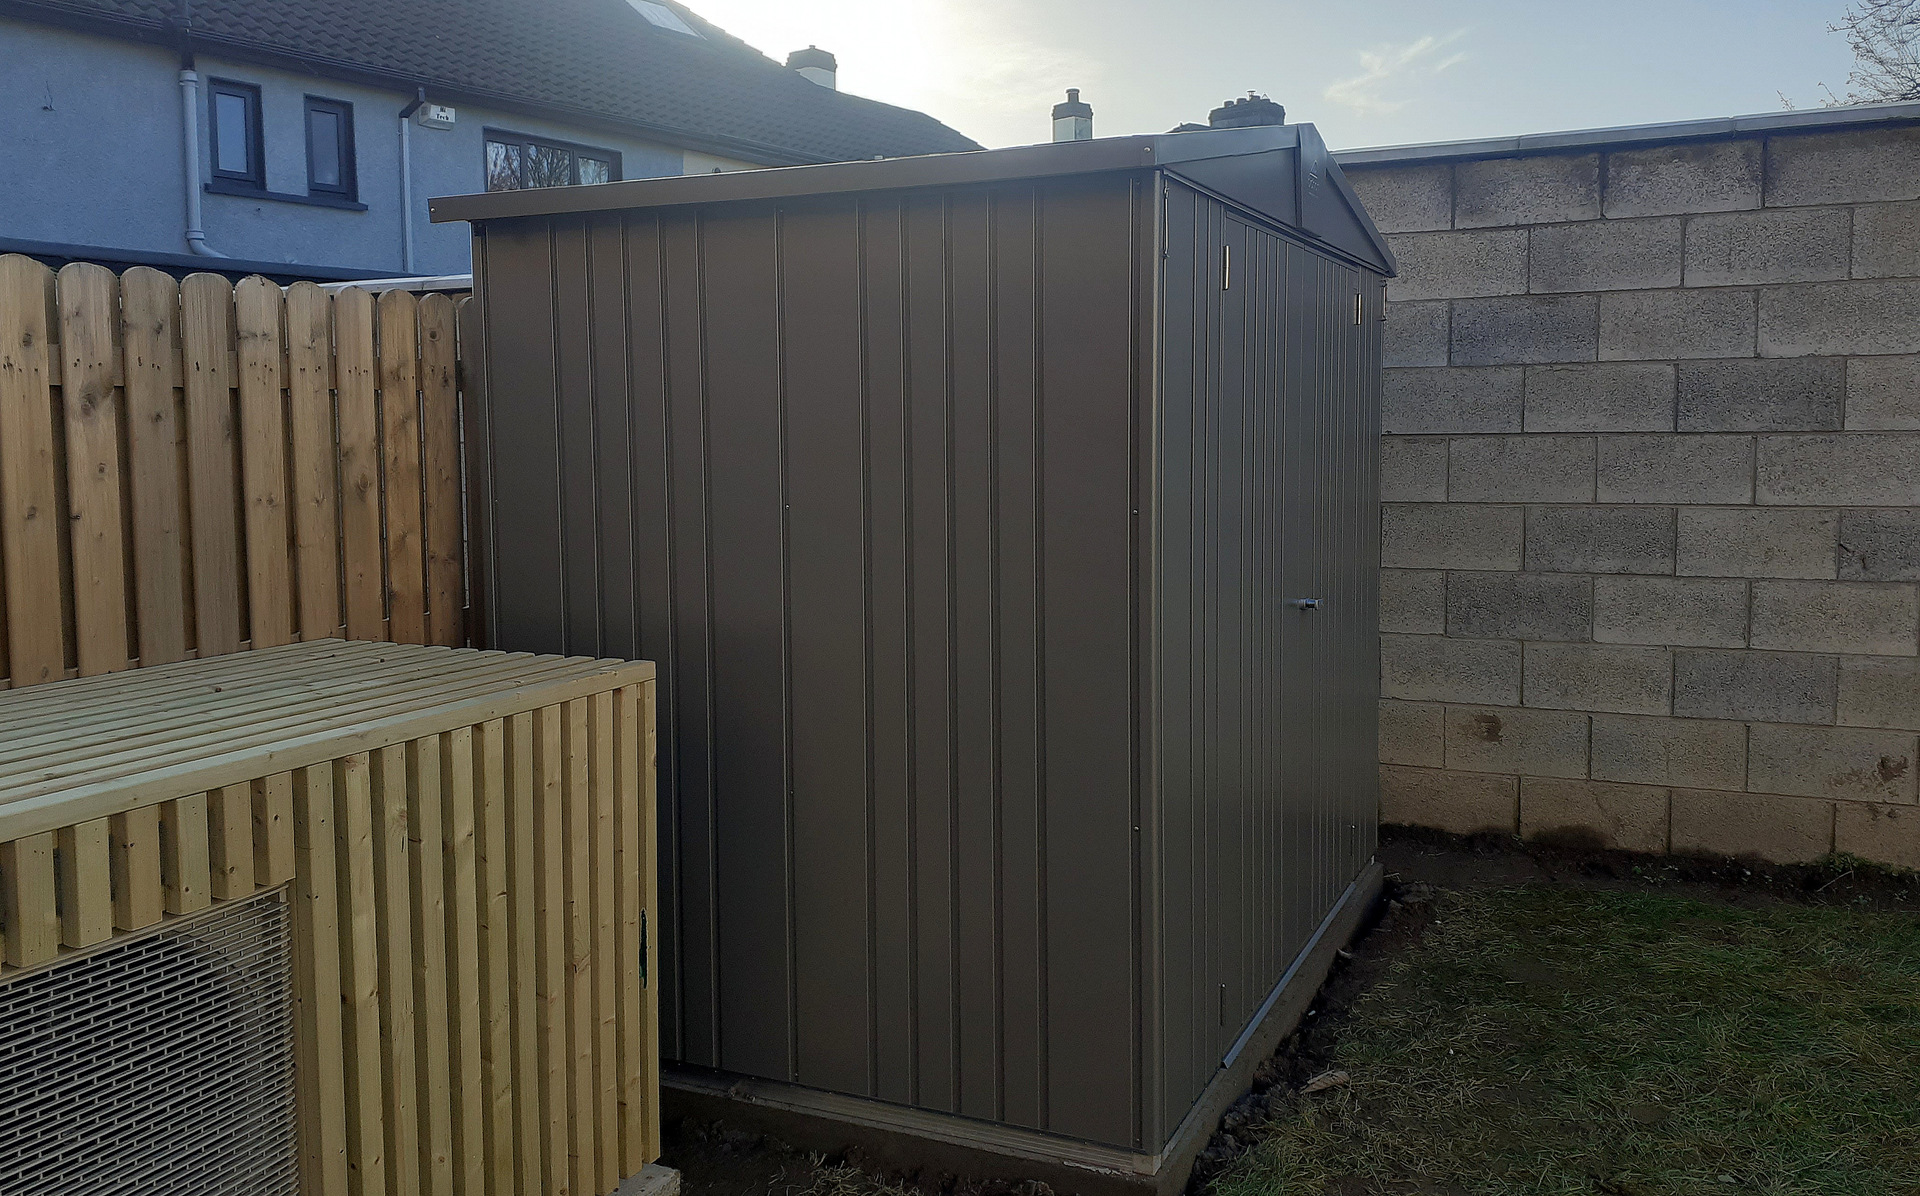 Biohort Europa Size 3, a low cost quality steel garden shed with FREE 20 year no rust warranty, in metallic quartz grey, supplied + fitted in Templeogue, Dublin 6W by Owen Chubb Landscapers